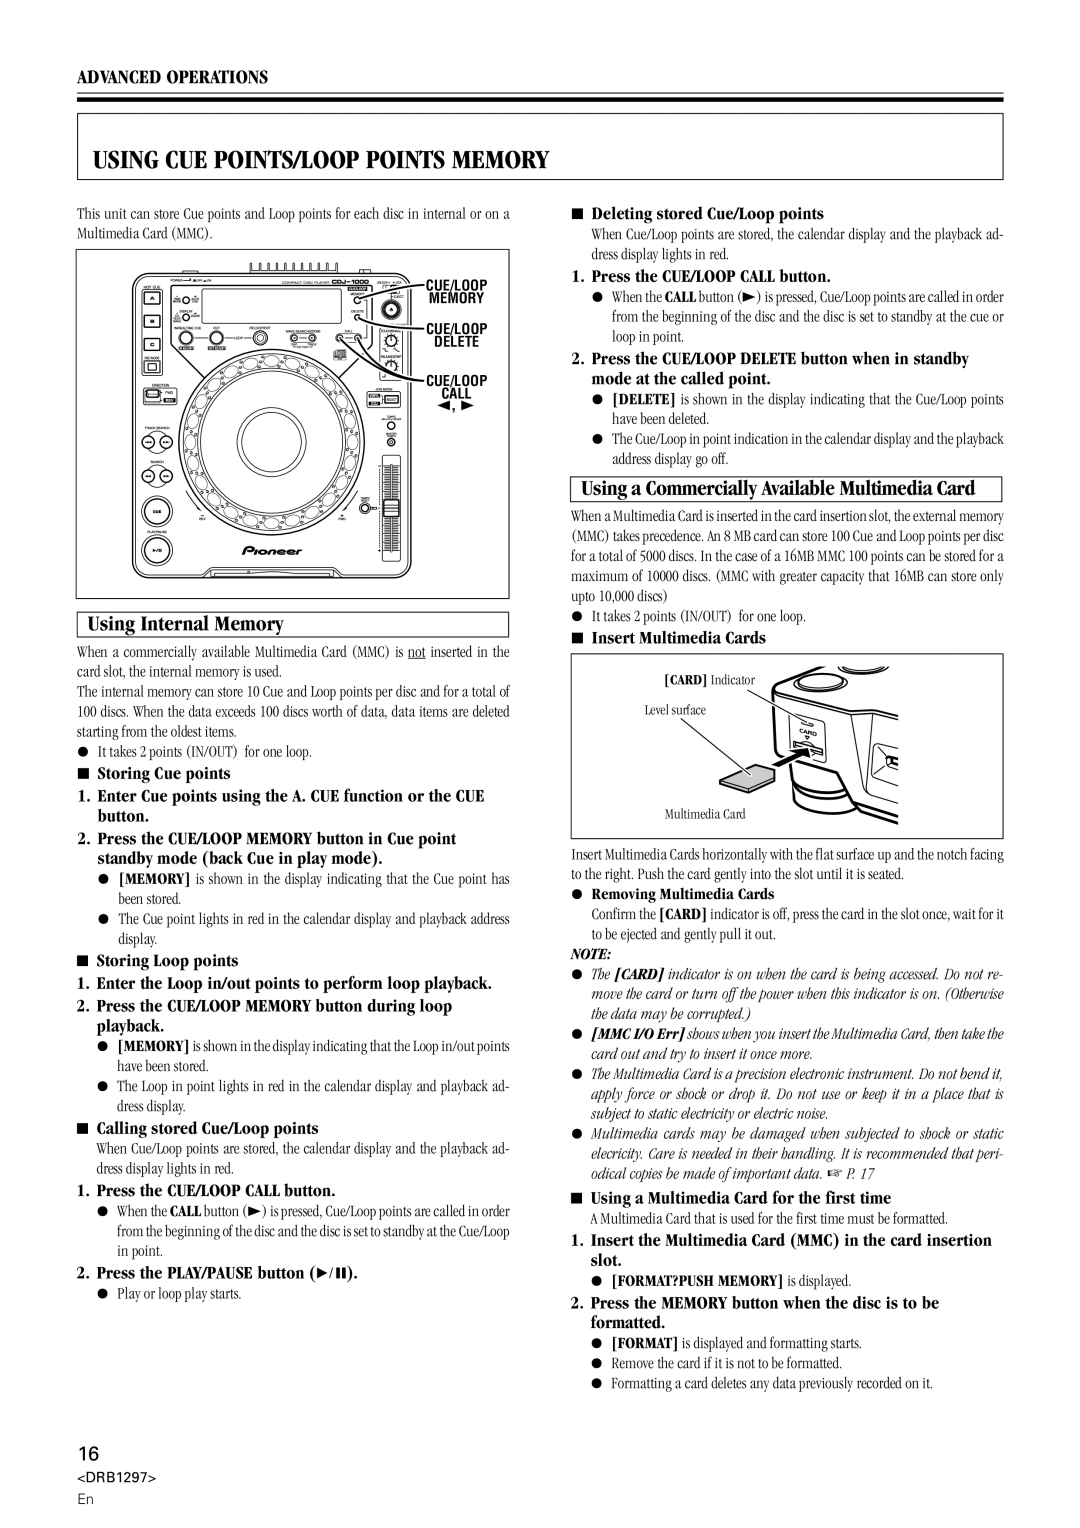 Pioneer CDJ-1000 operating instructions Using Cue Points/Loop Points Memory, Using Internal Memory, Advanced Operations 